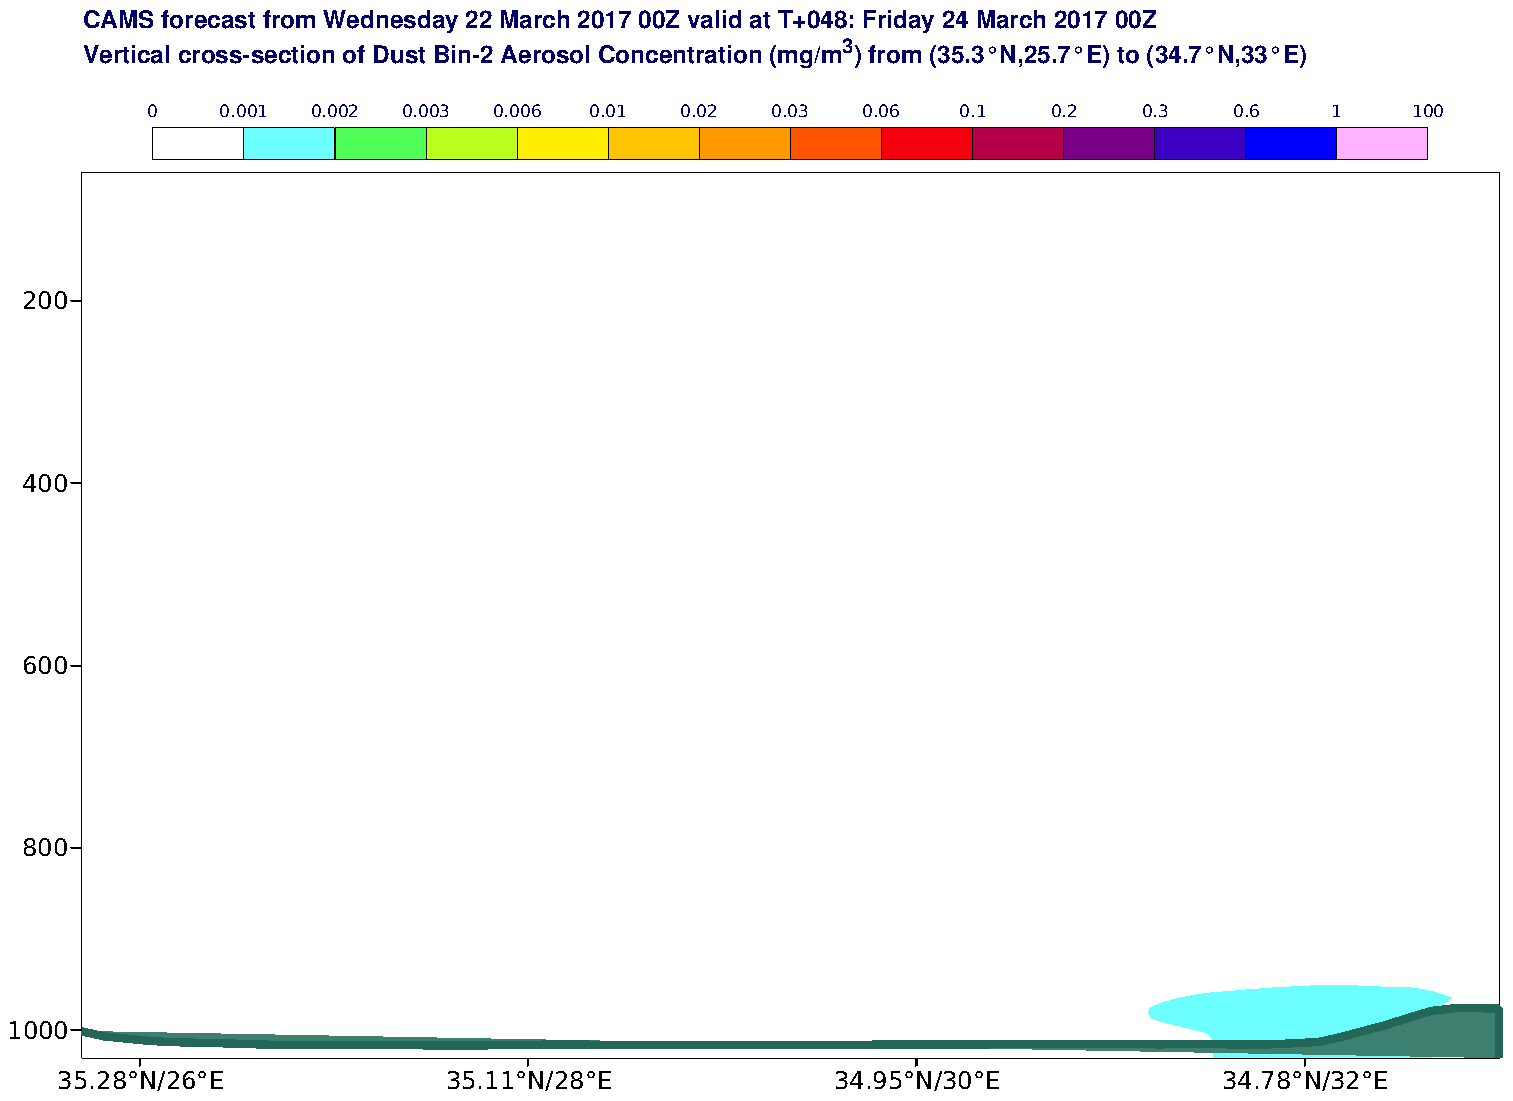 Vertical cross-section of Dust Bin-2 Aerosol Concentration (mg/m3) valid at T48 - 2017-03-24 00:00